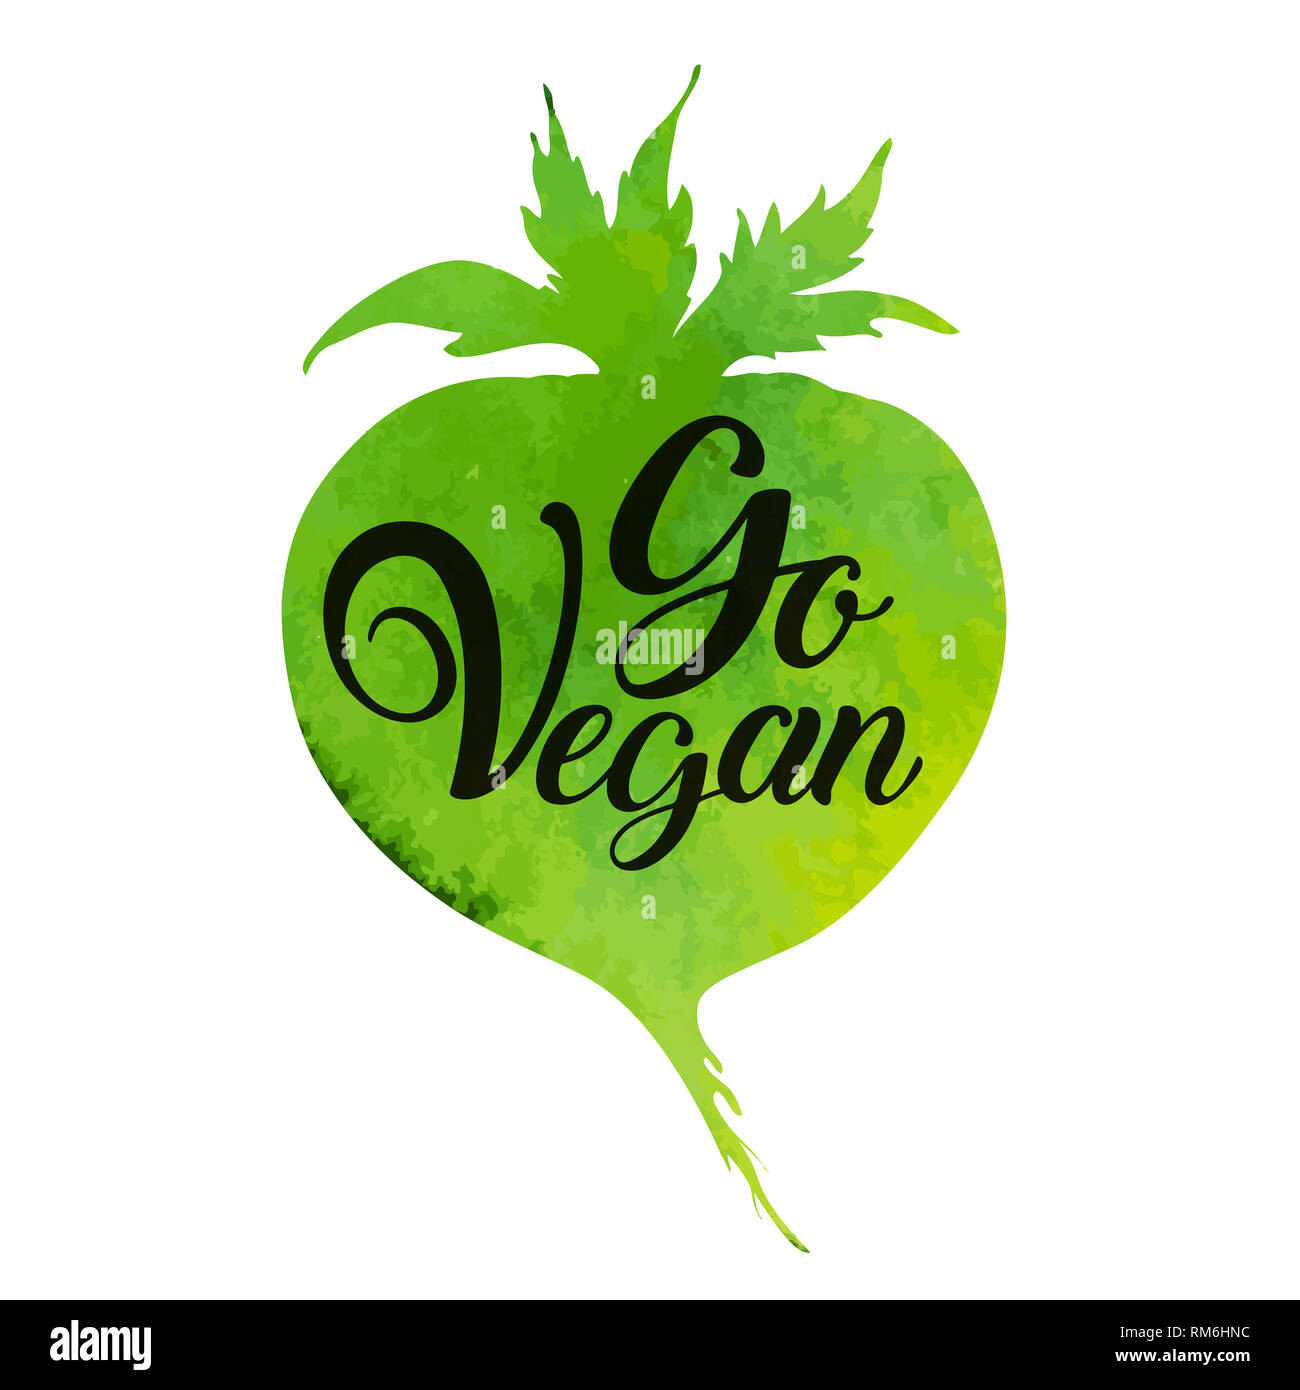 Green watercolor root vegetable and lettering Go vegan. Vegetarian lifestyle concept. Stock Photo